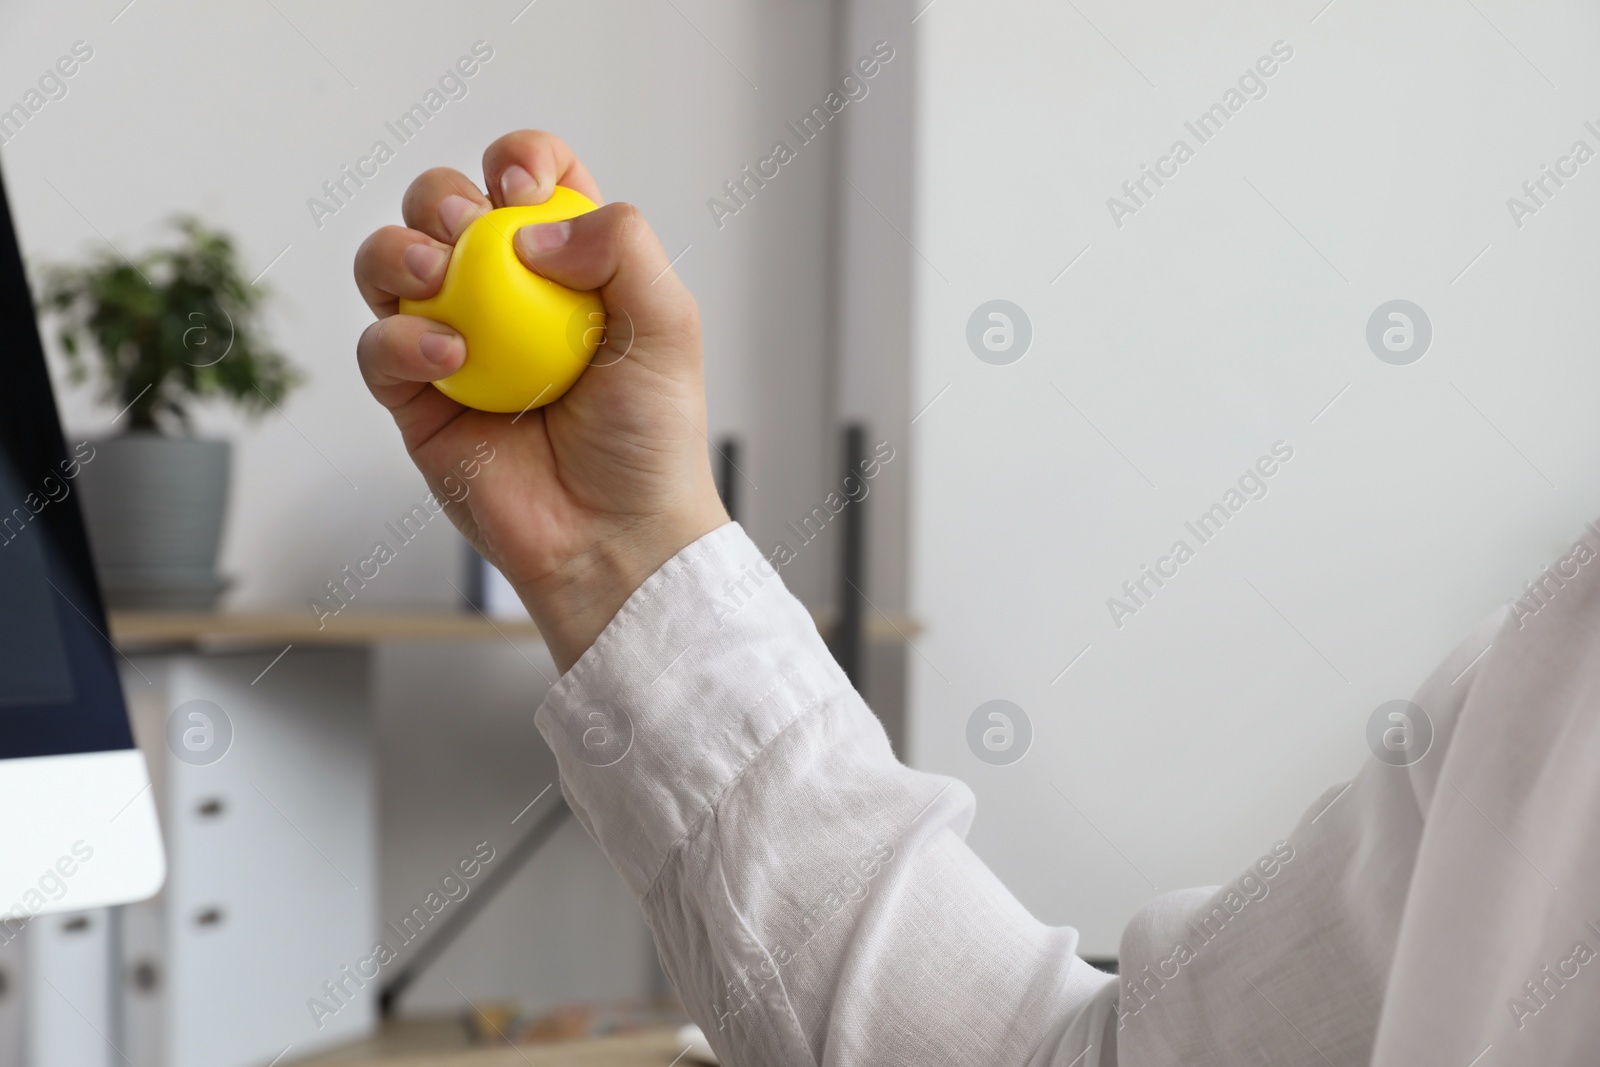 Photo of Man squeezing yellow stress ball in office, closeup